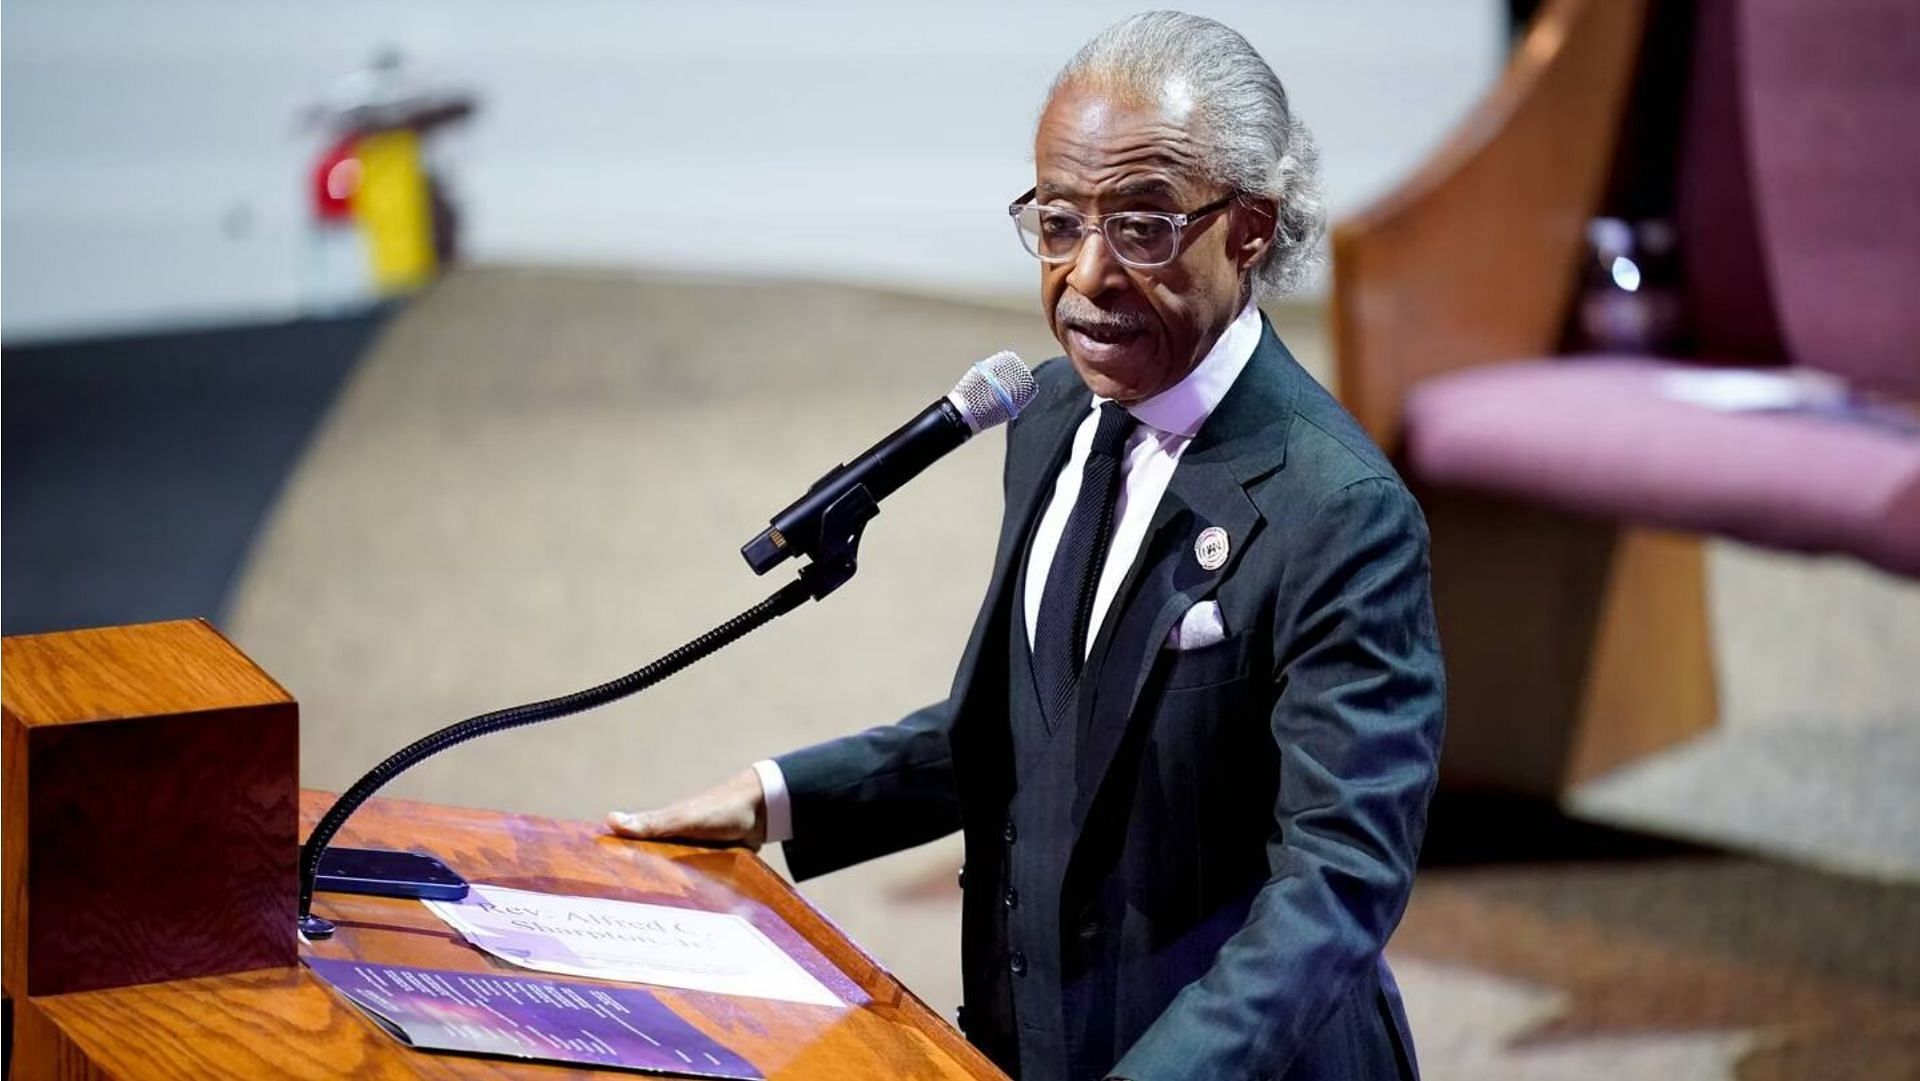 Al Sharpton lost massive amount of weight through exercise and dieting. (Photo via Andrew Nelles/Getty)